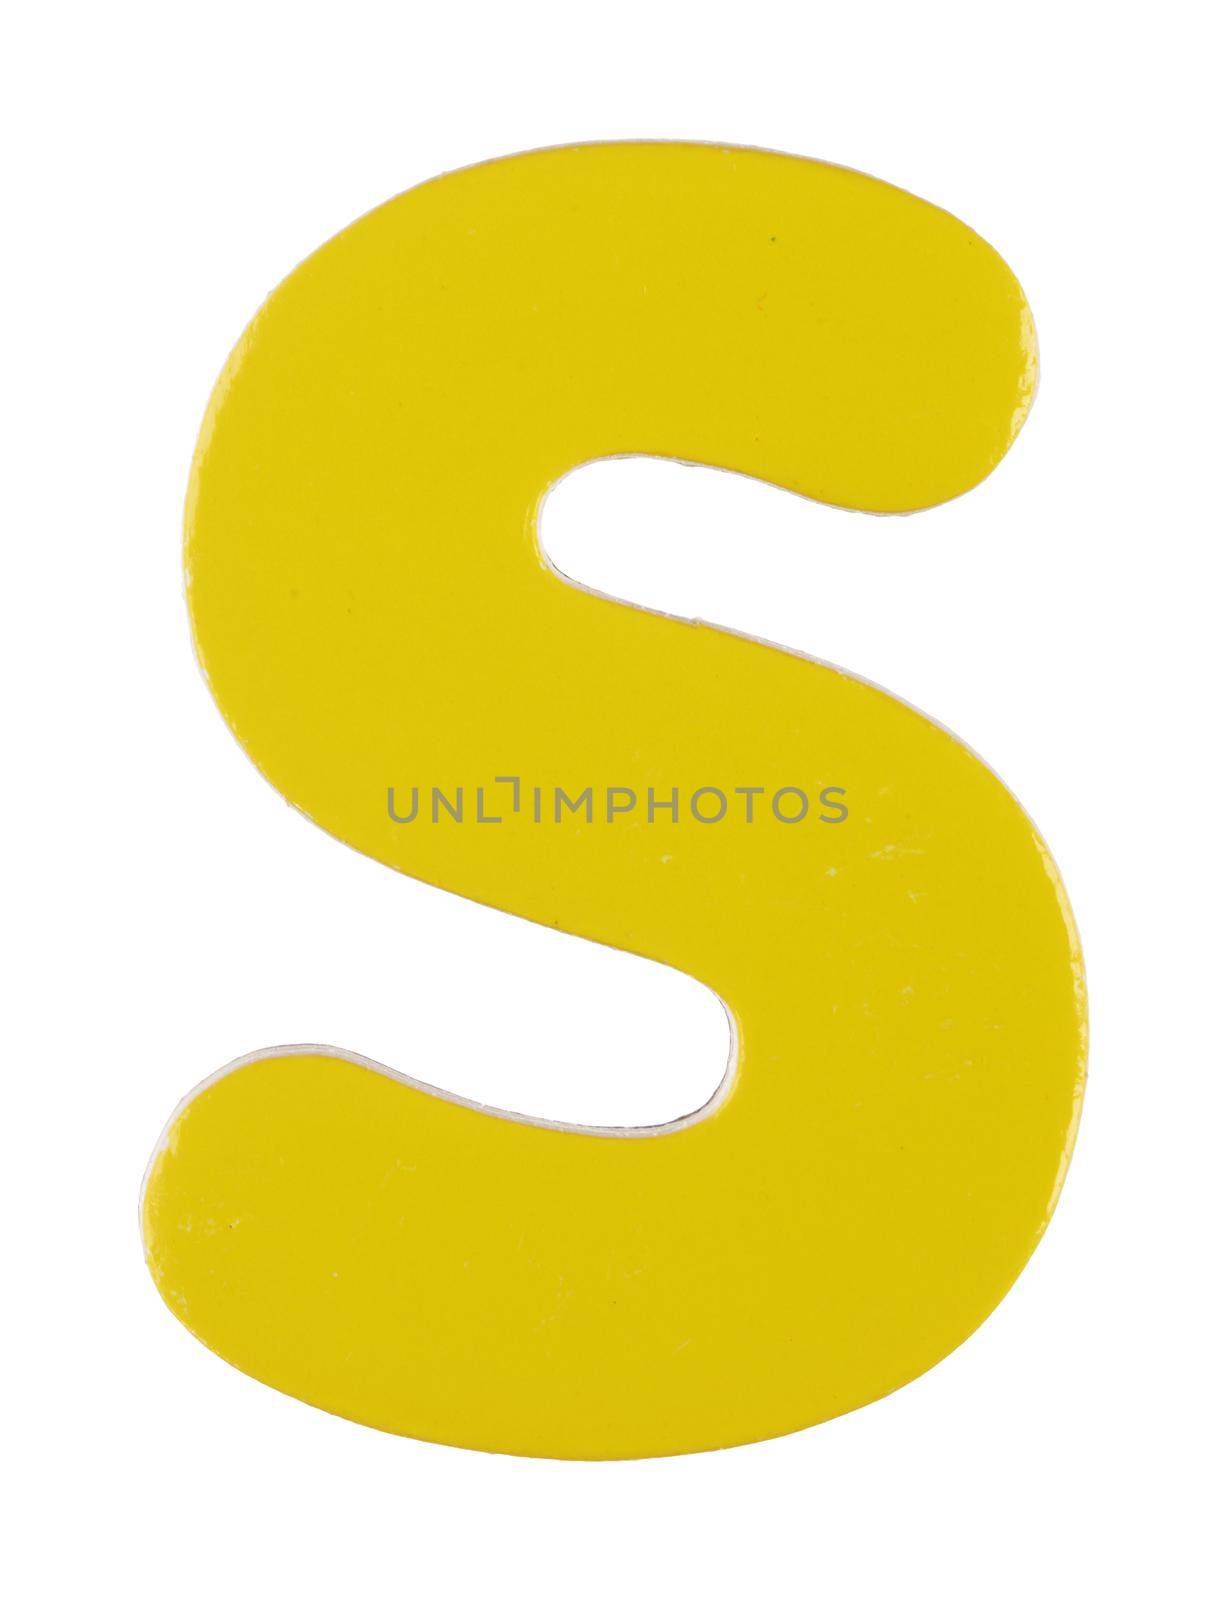 lower case s magnetic letter on white with clipping path by VivacityImages